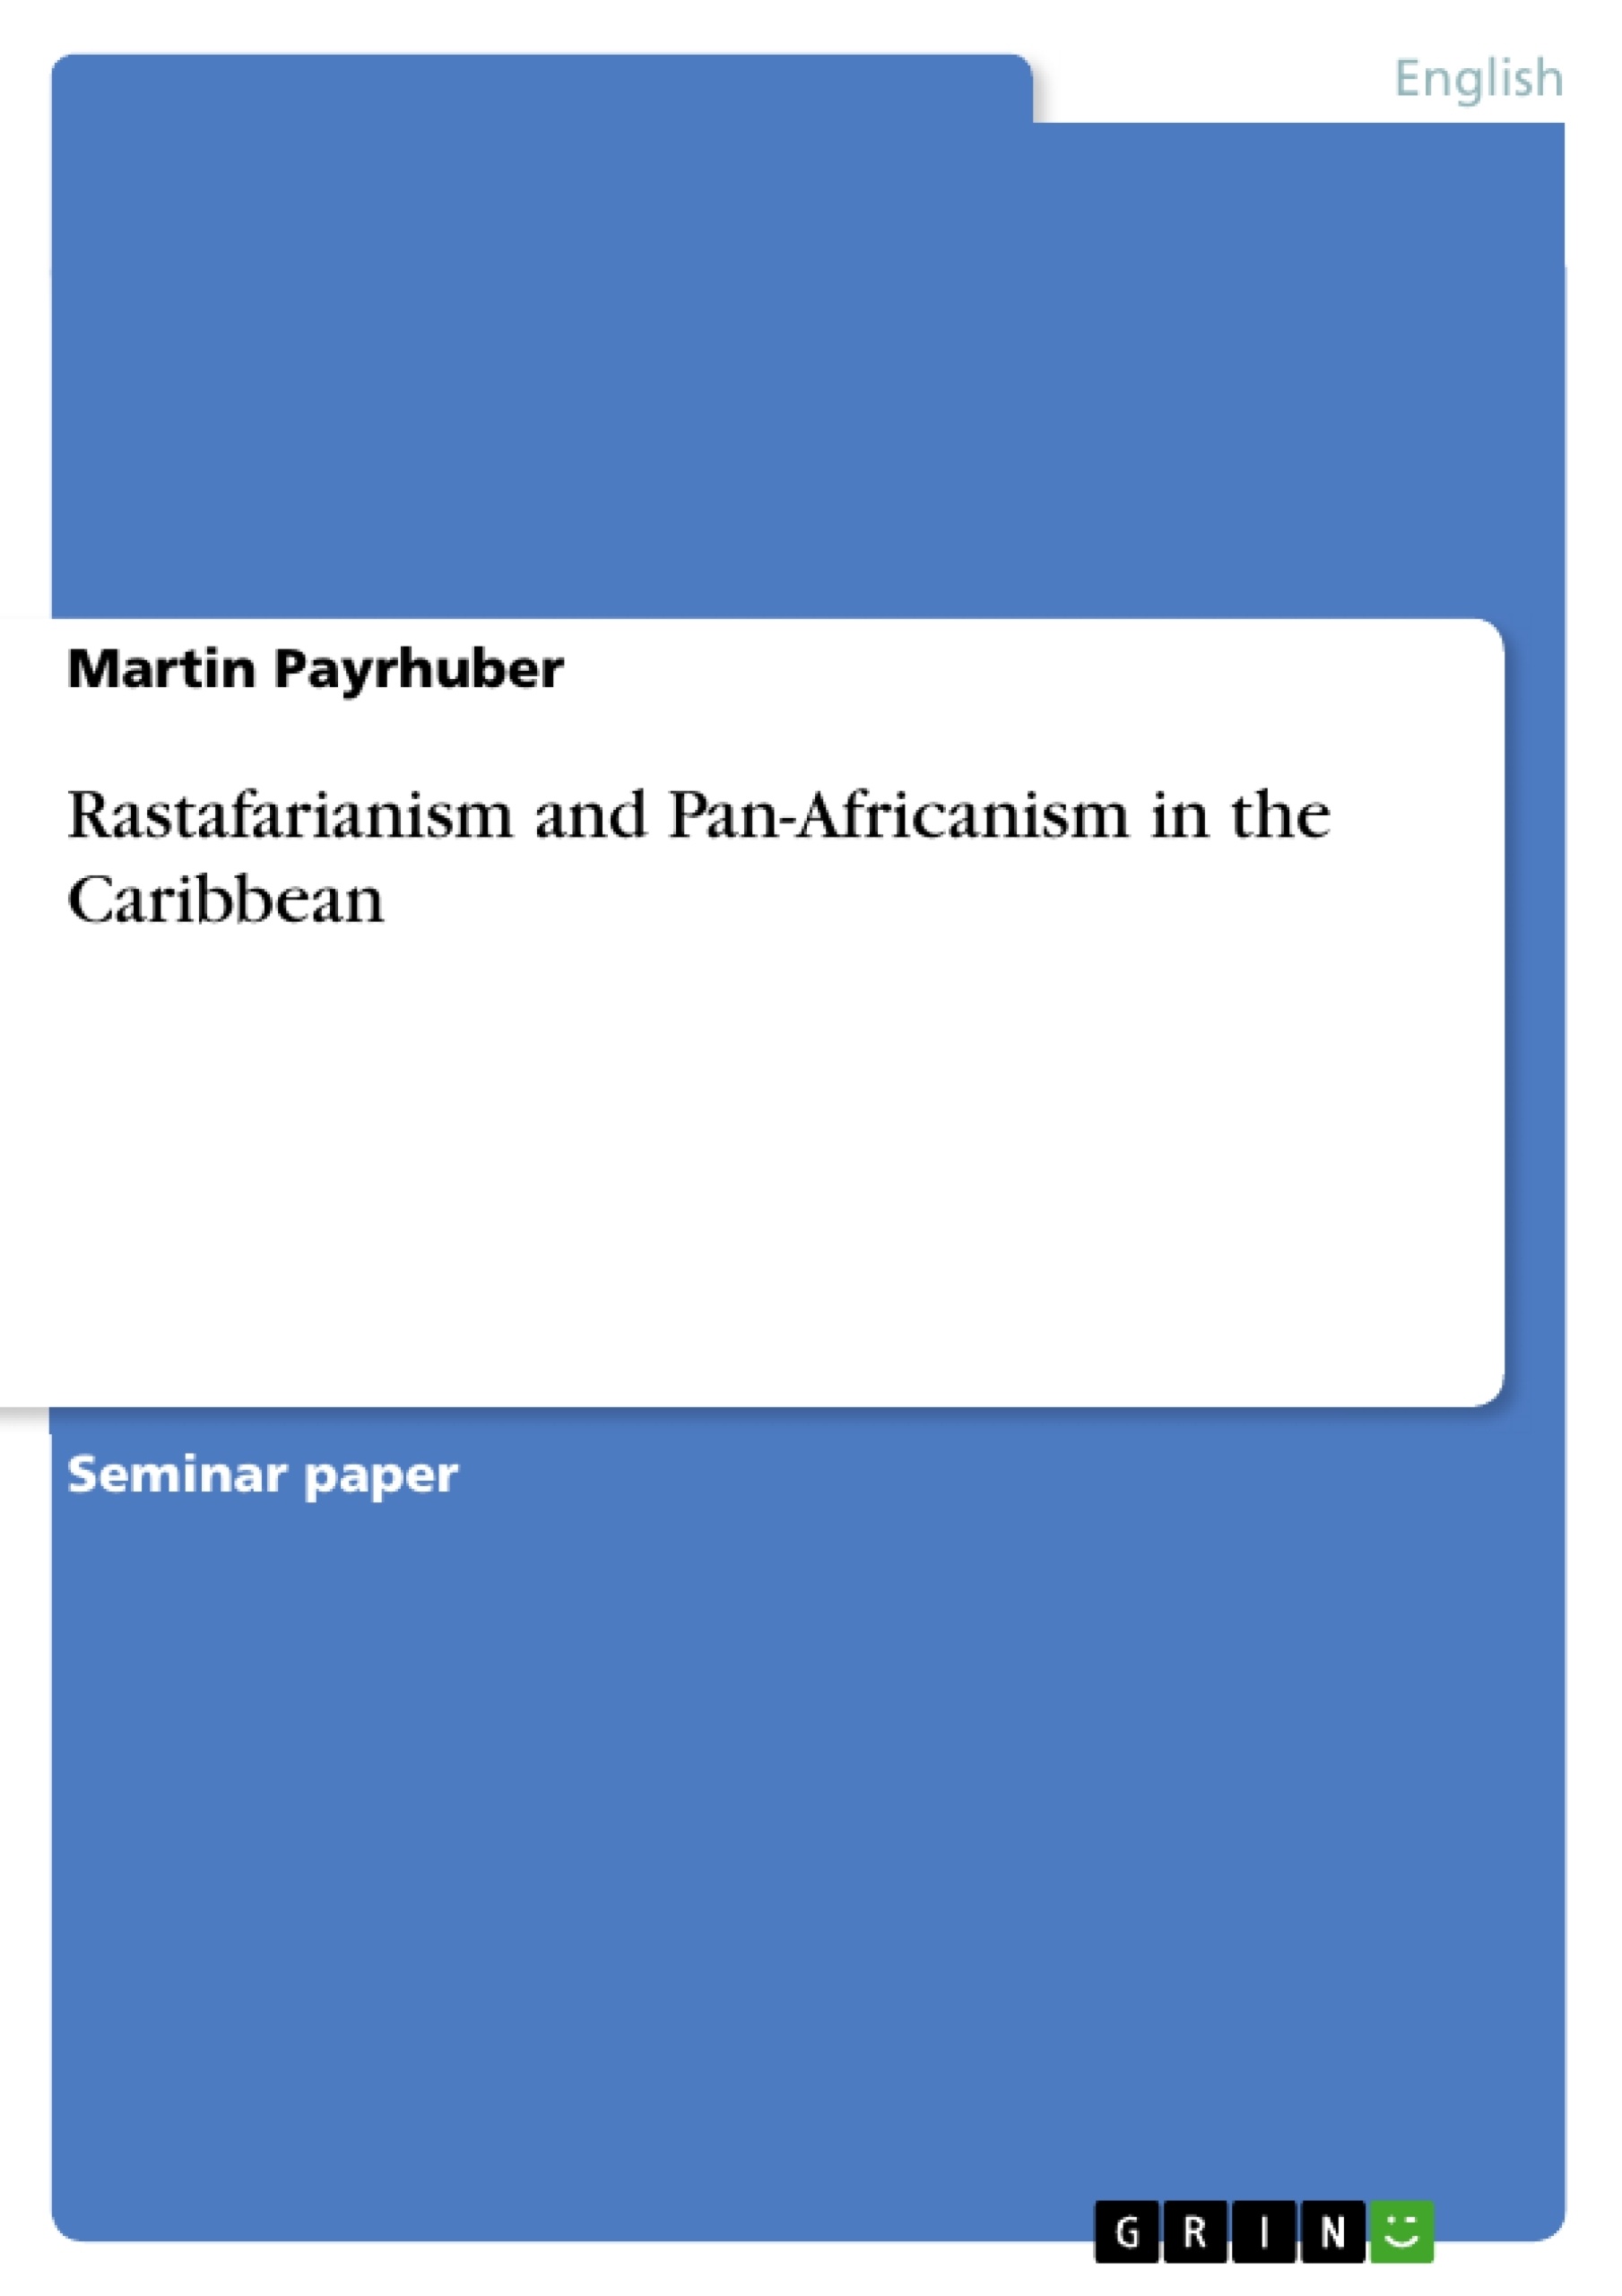 Titre: Rastafarianism and Pan-Africanism in the Caribbean